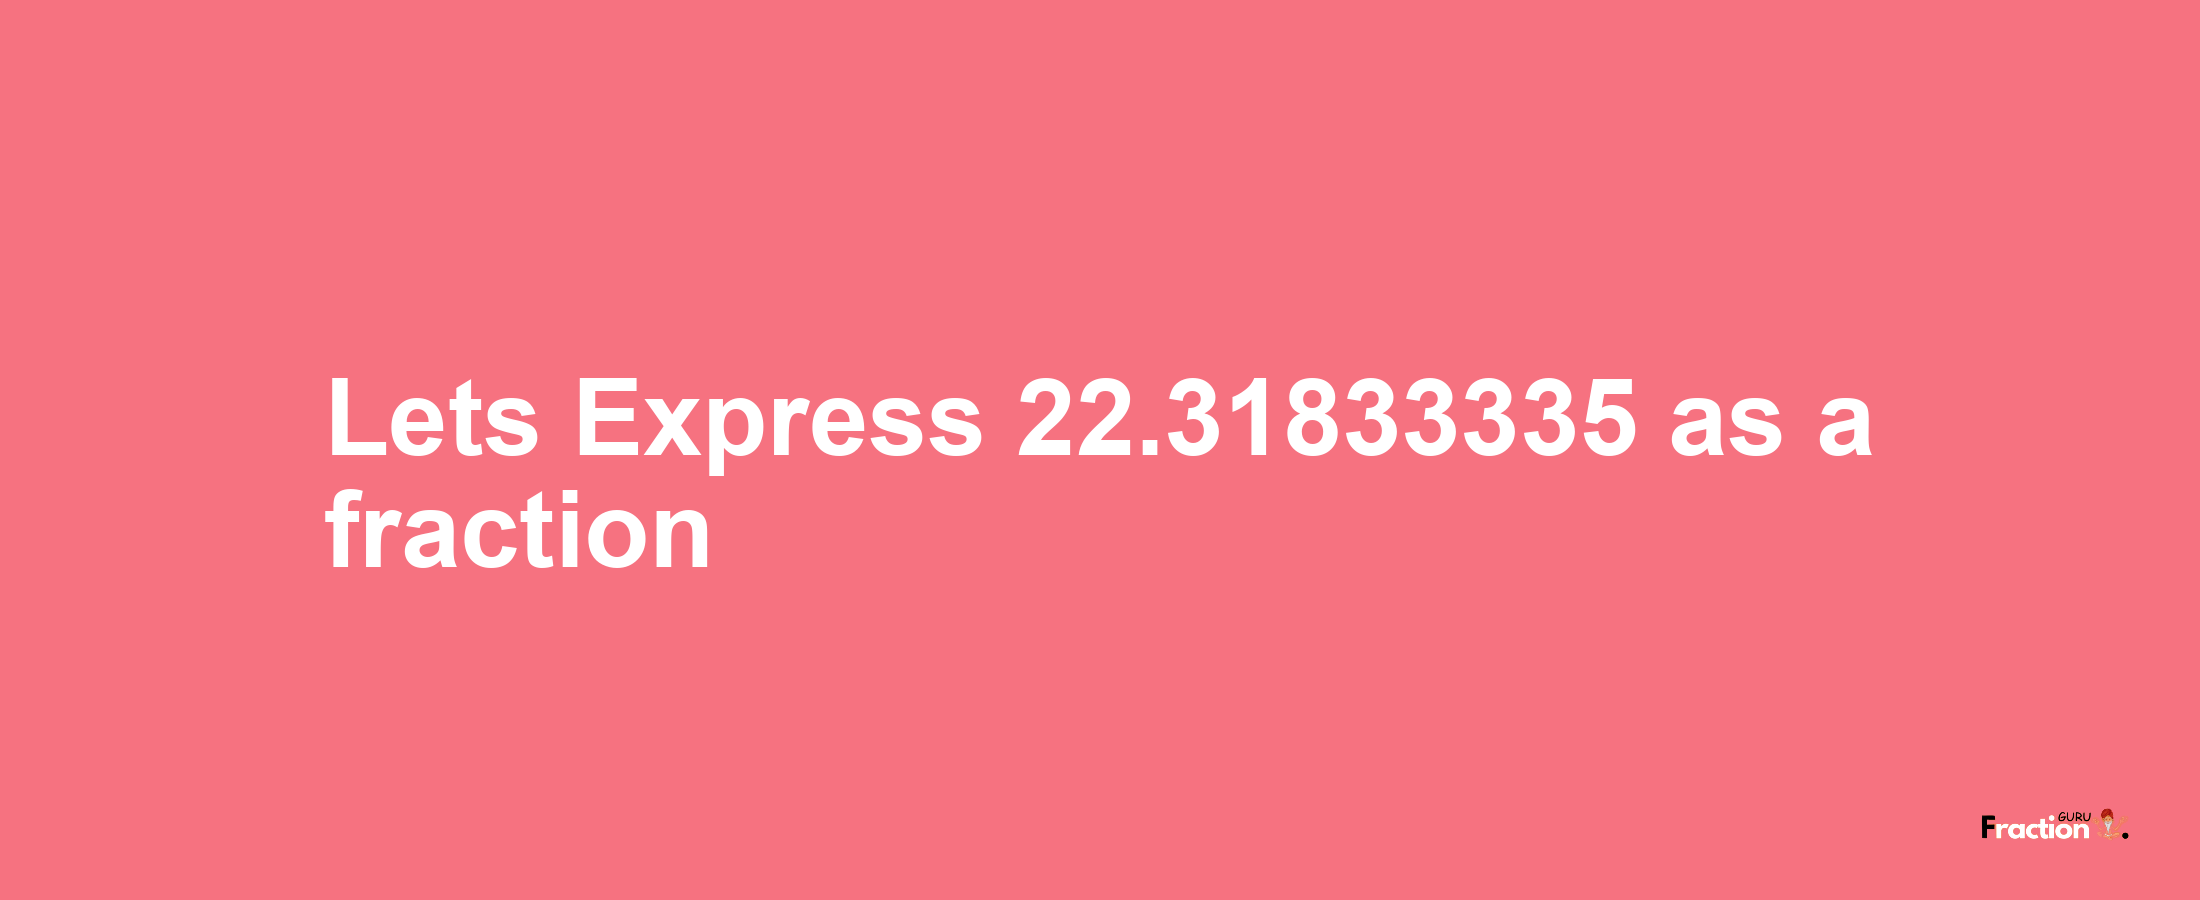 Lets Express 22.31833335 as afraction